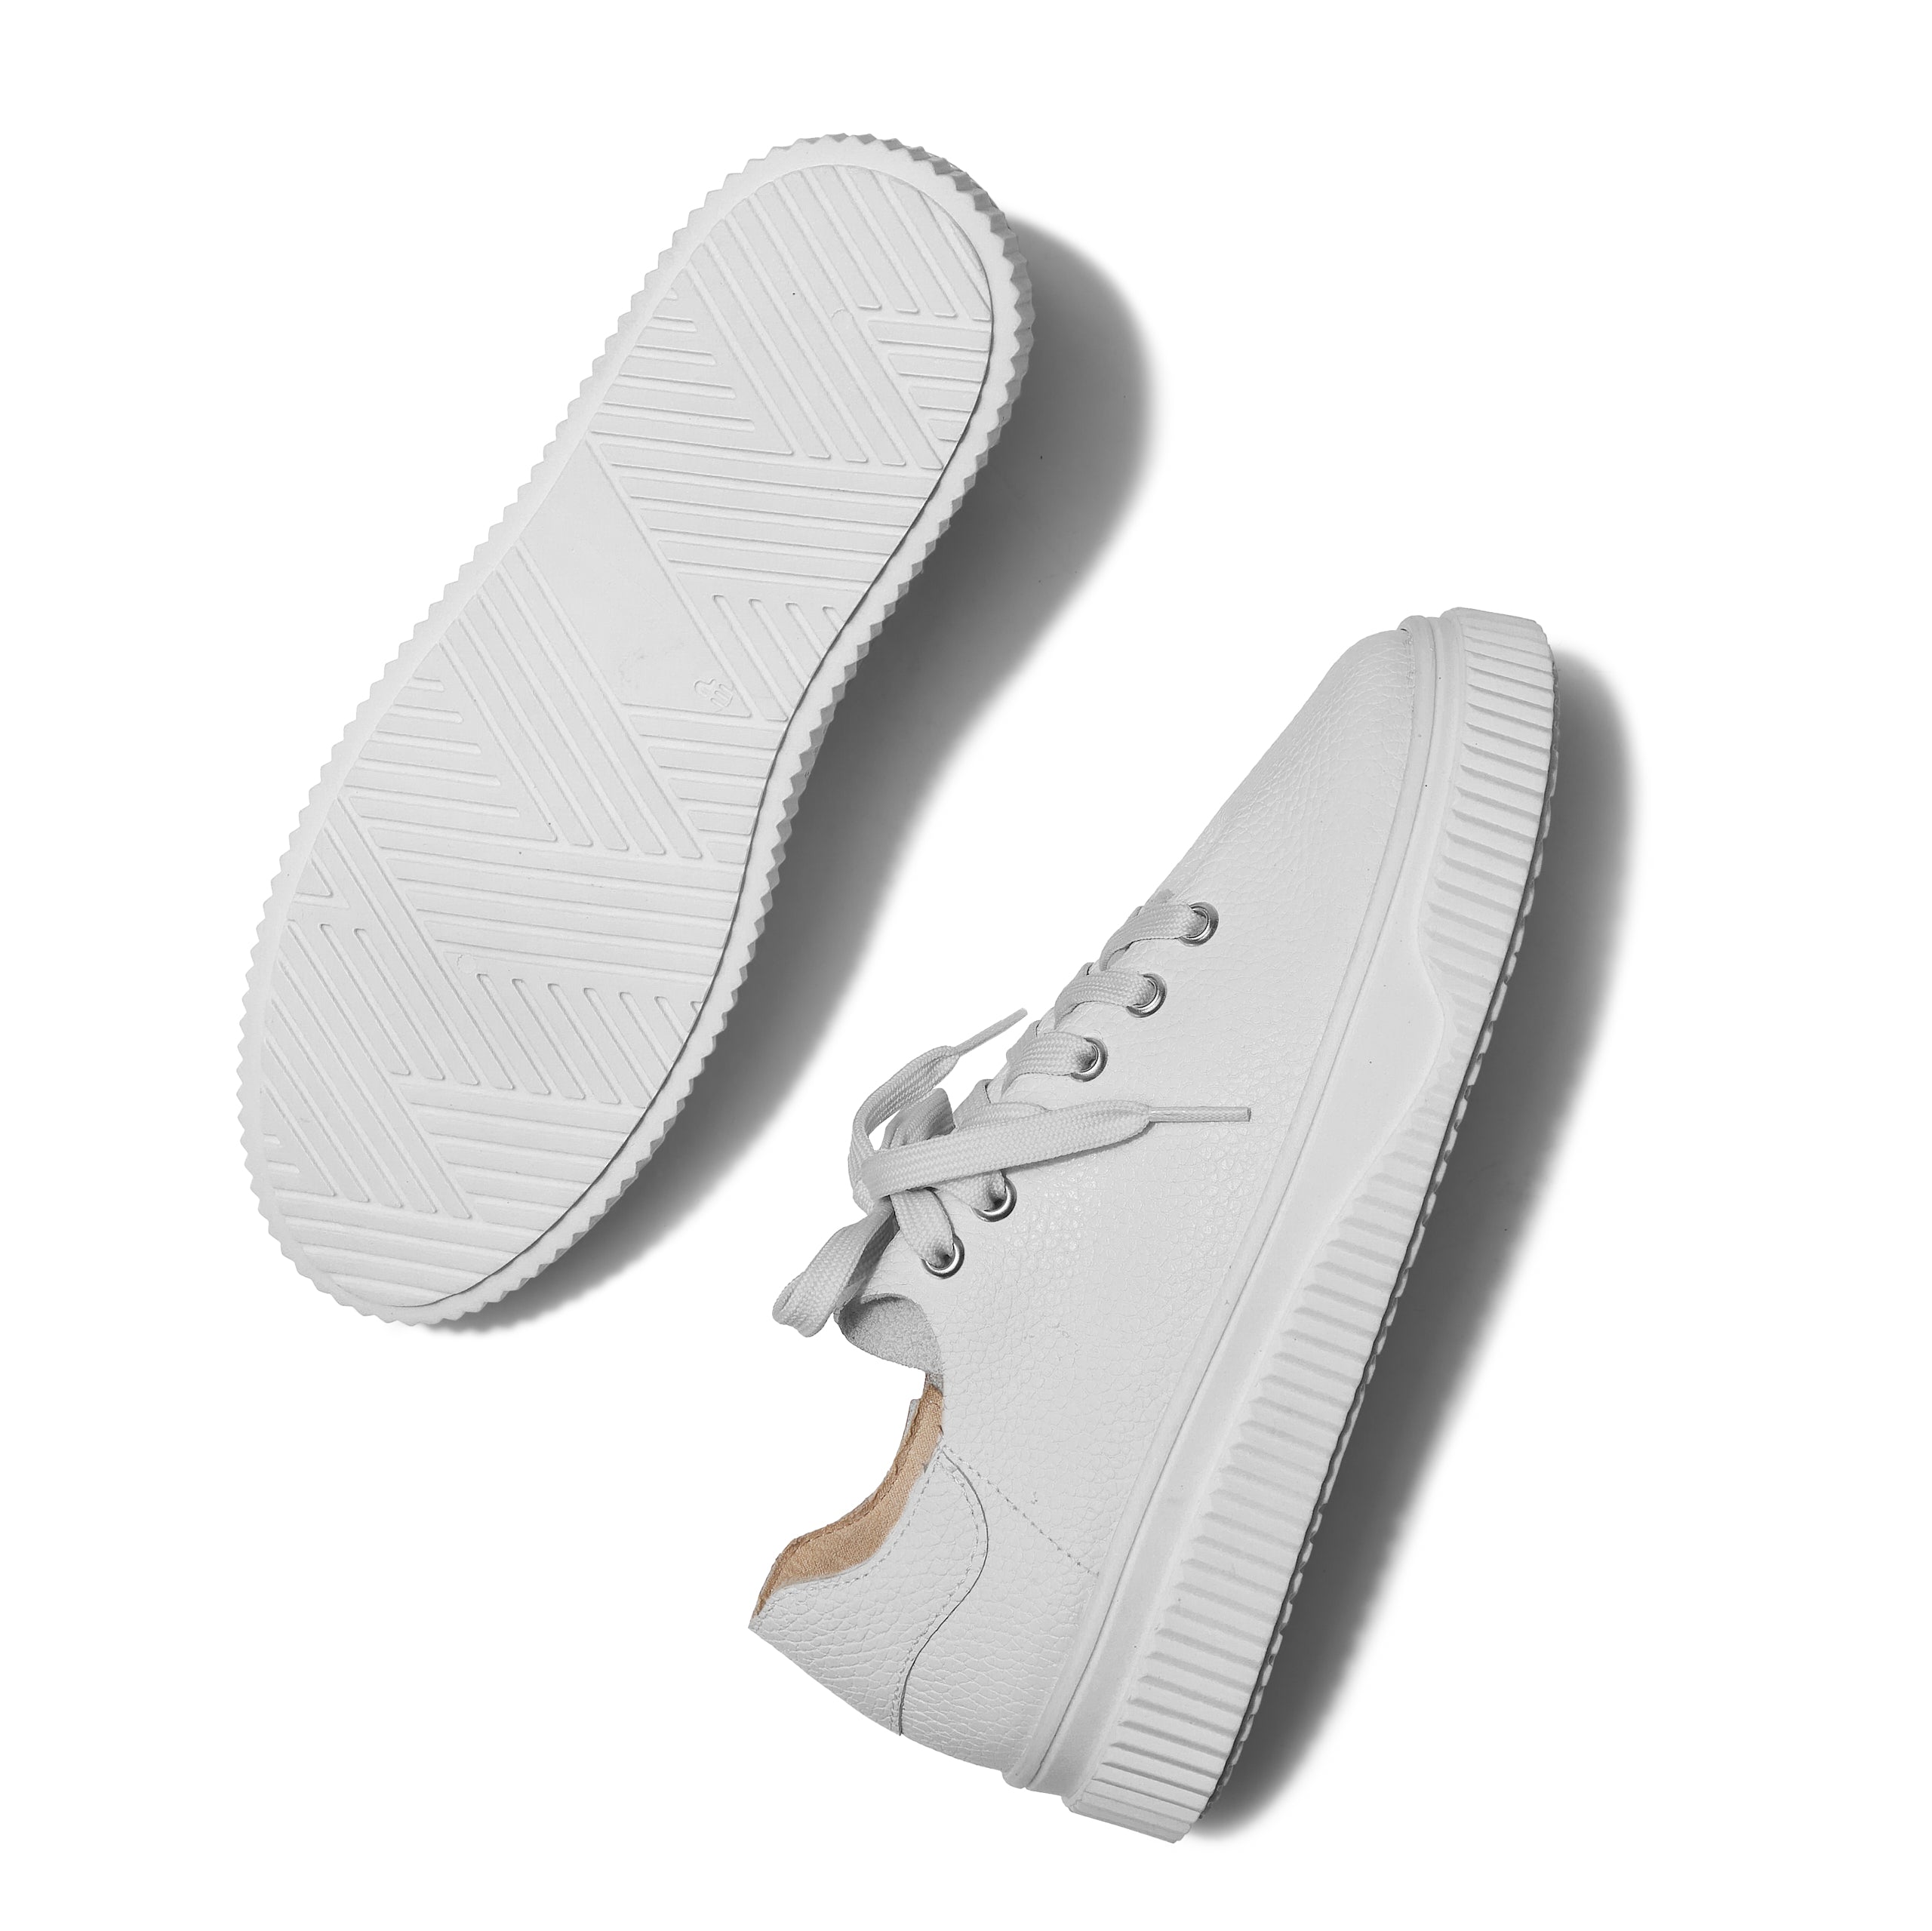 The Nude Leather Sneaker